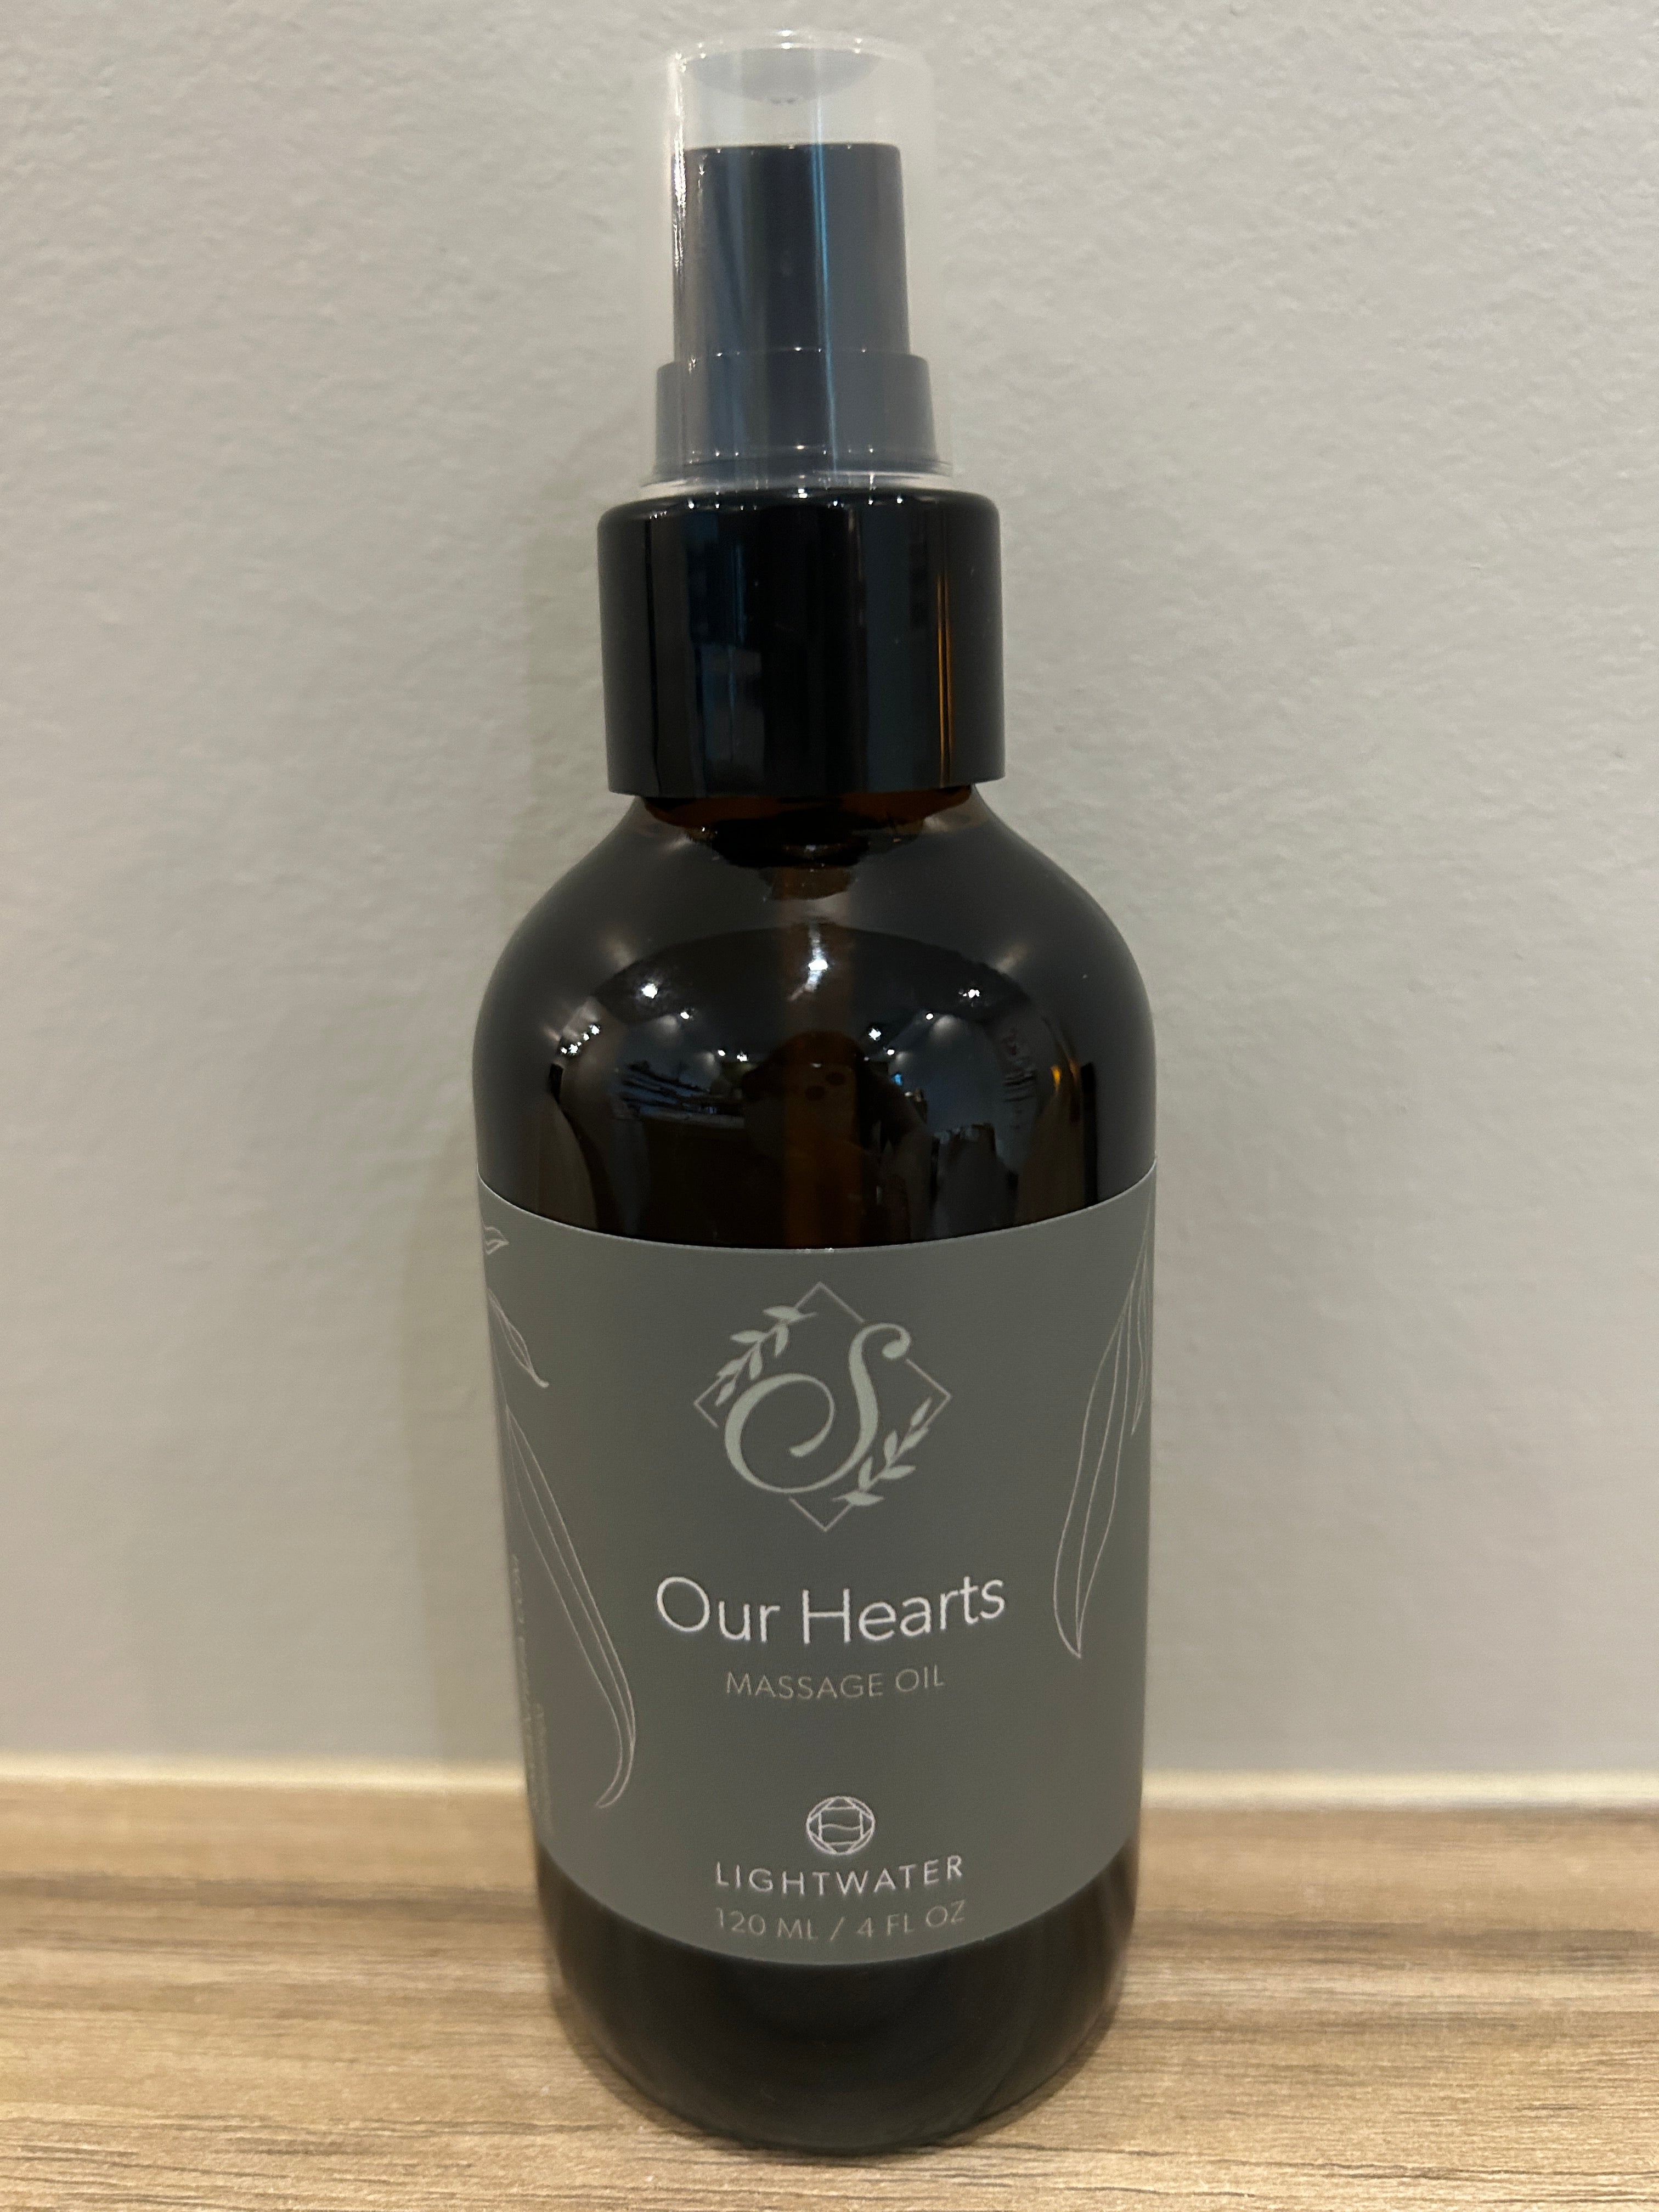 Our Hearts Massage Oil